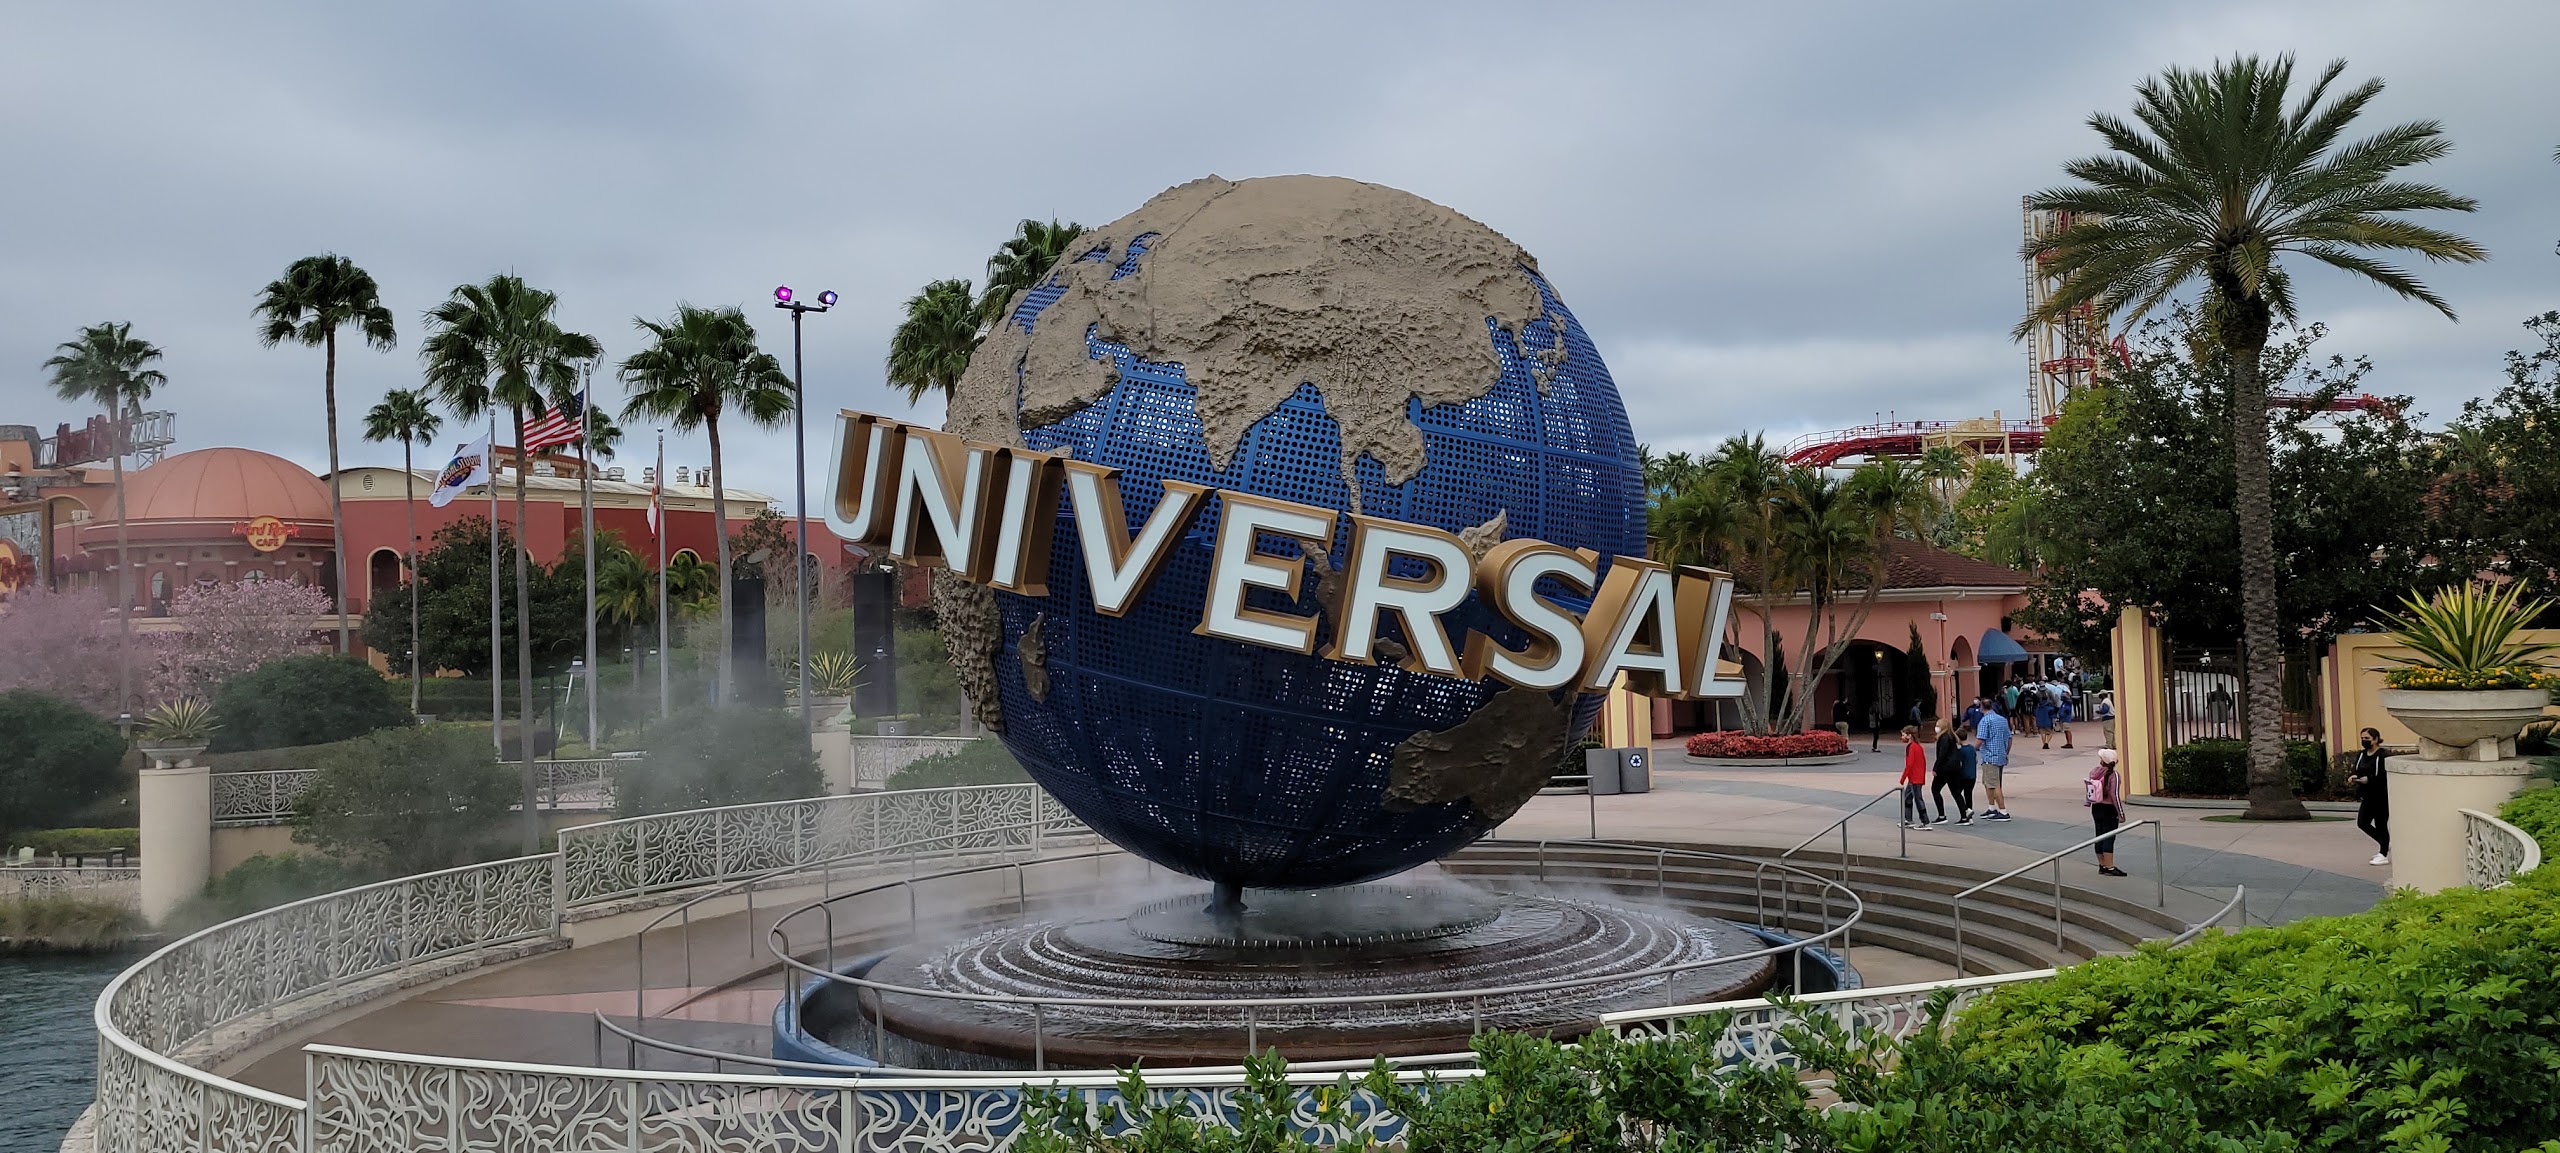 Florida Man uses stolen credit card to purchase $62,000 in Universal Orlando Vacation Packages